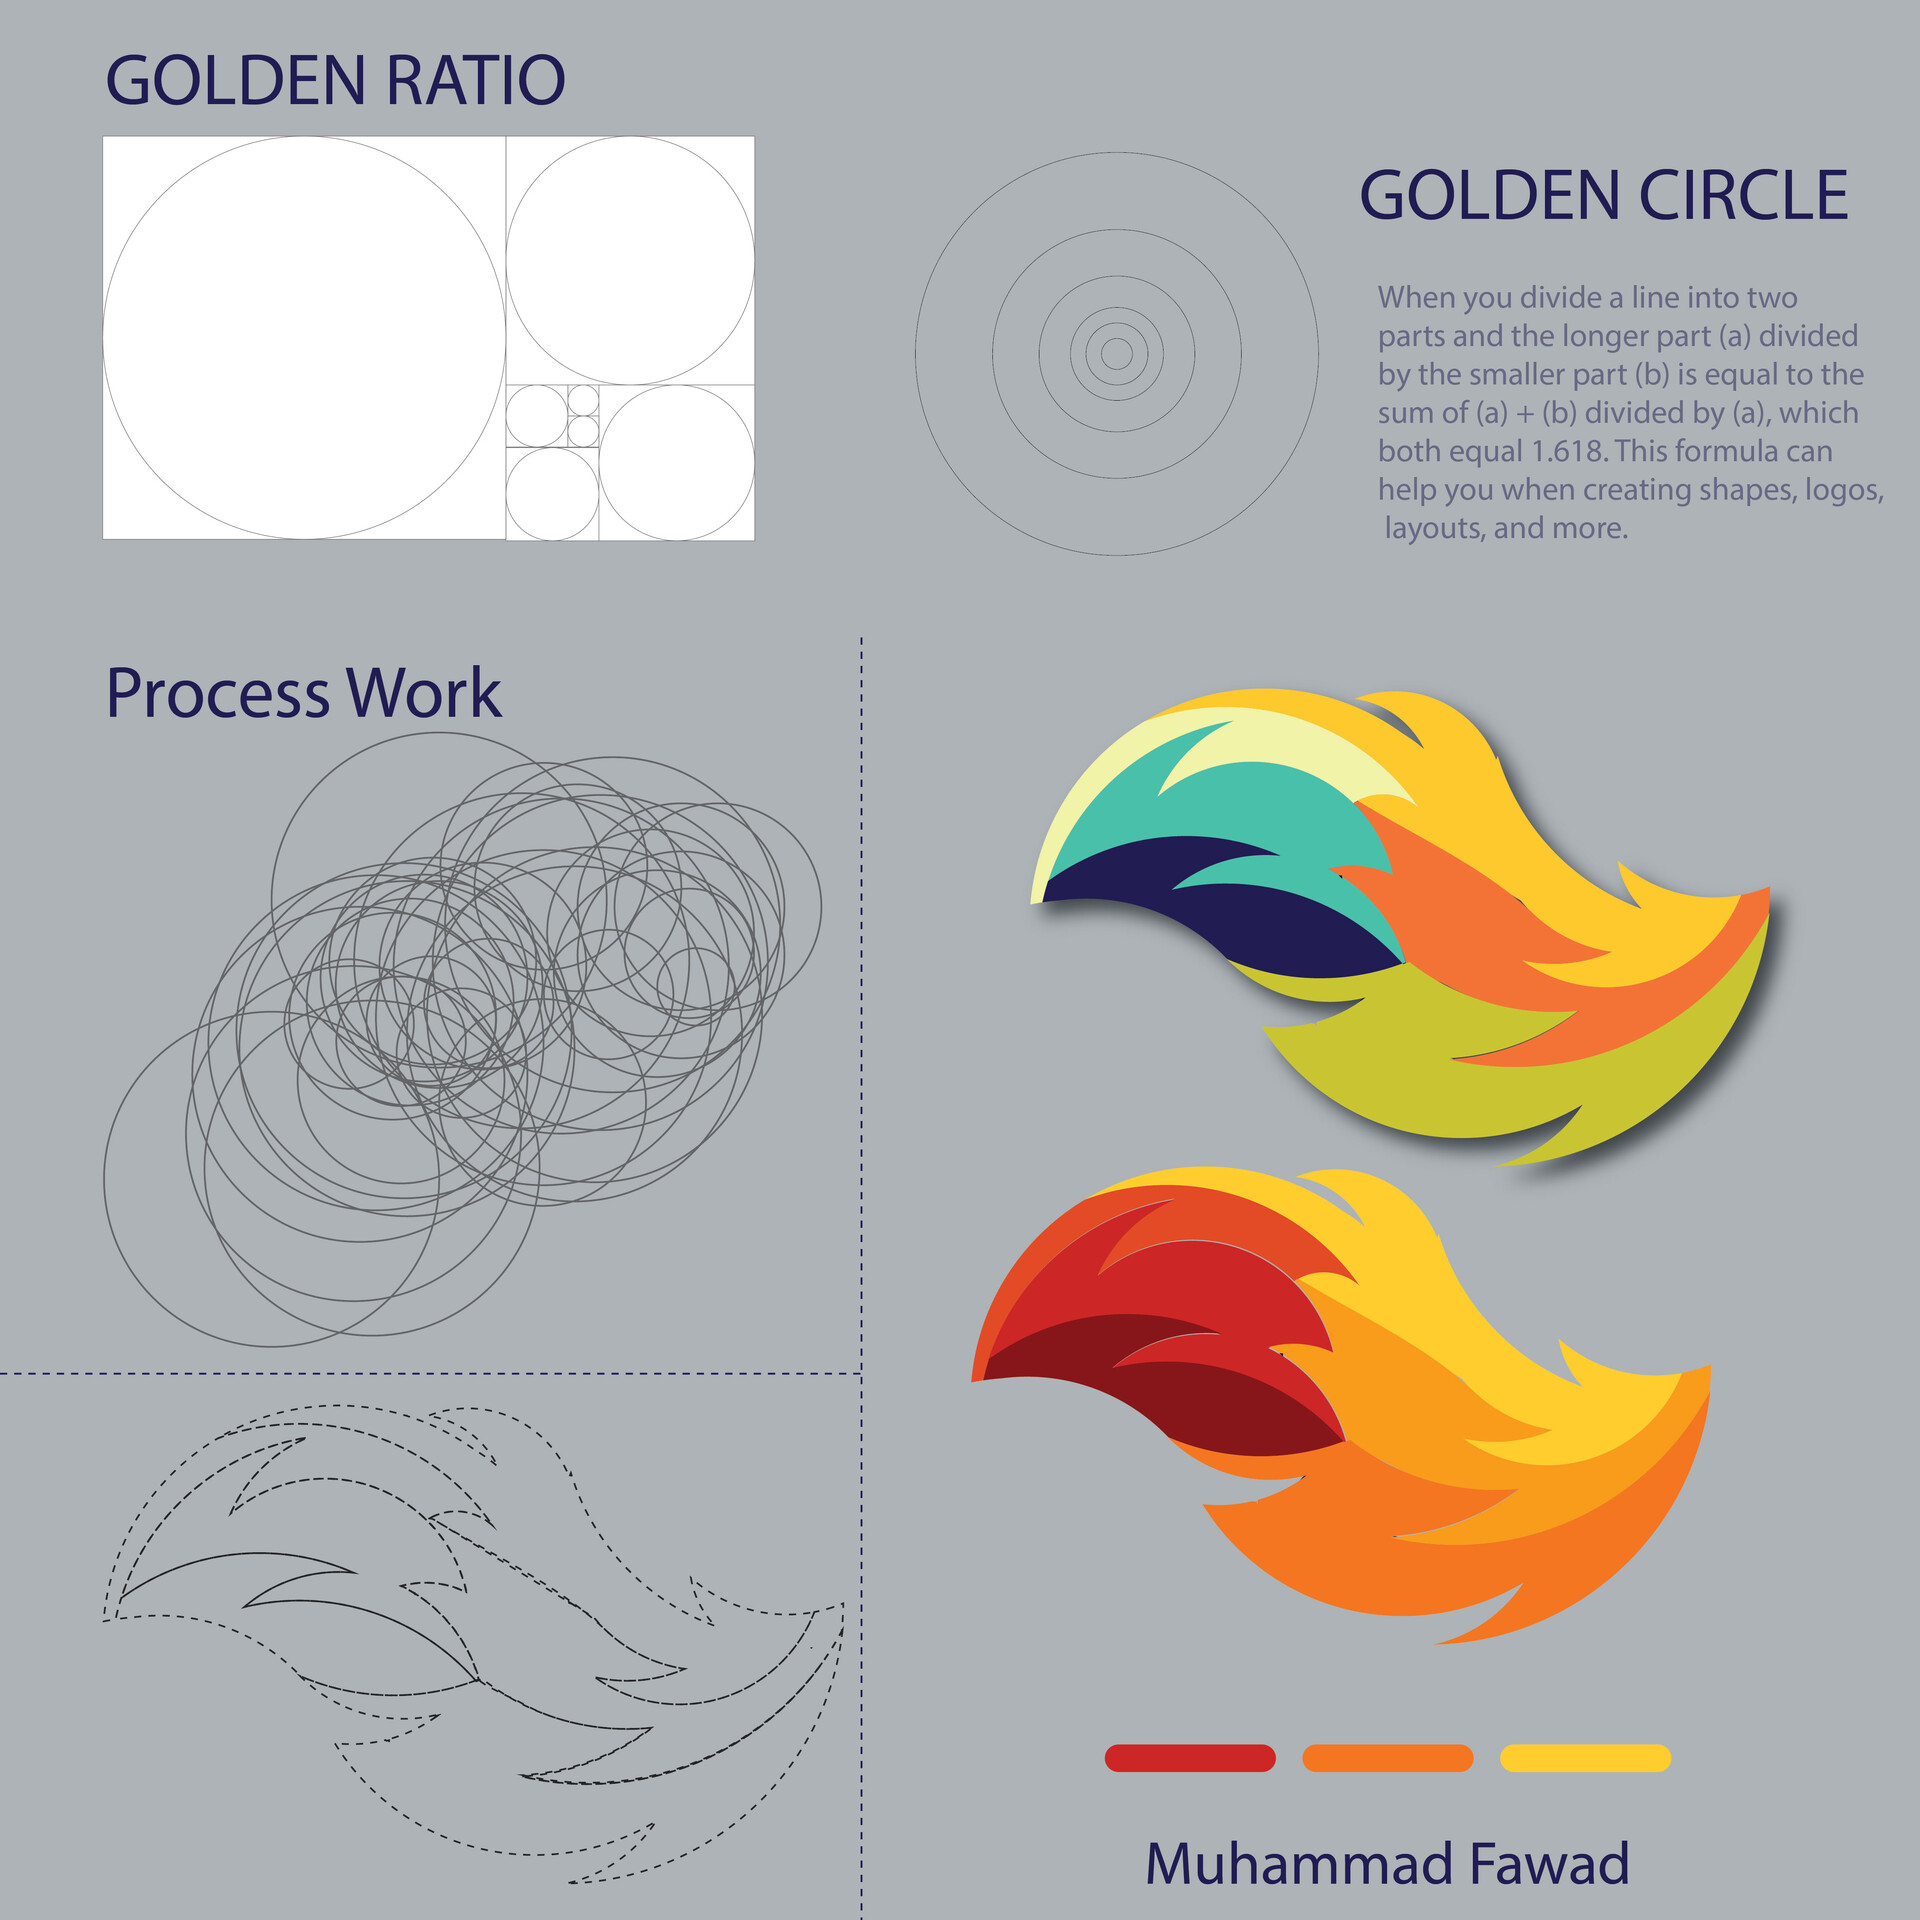 How To Use Golden Ratio in Logo Design